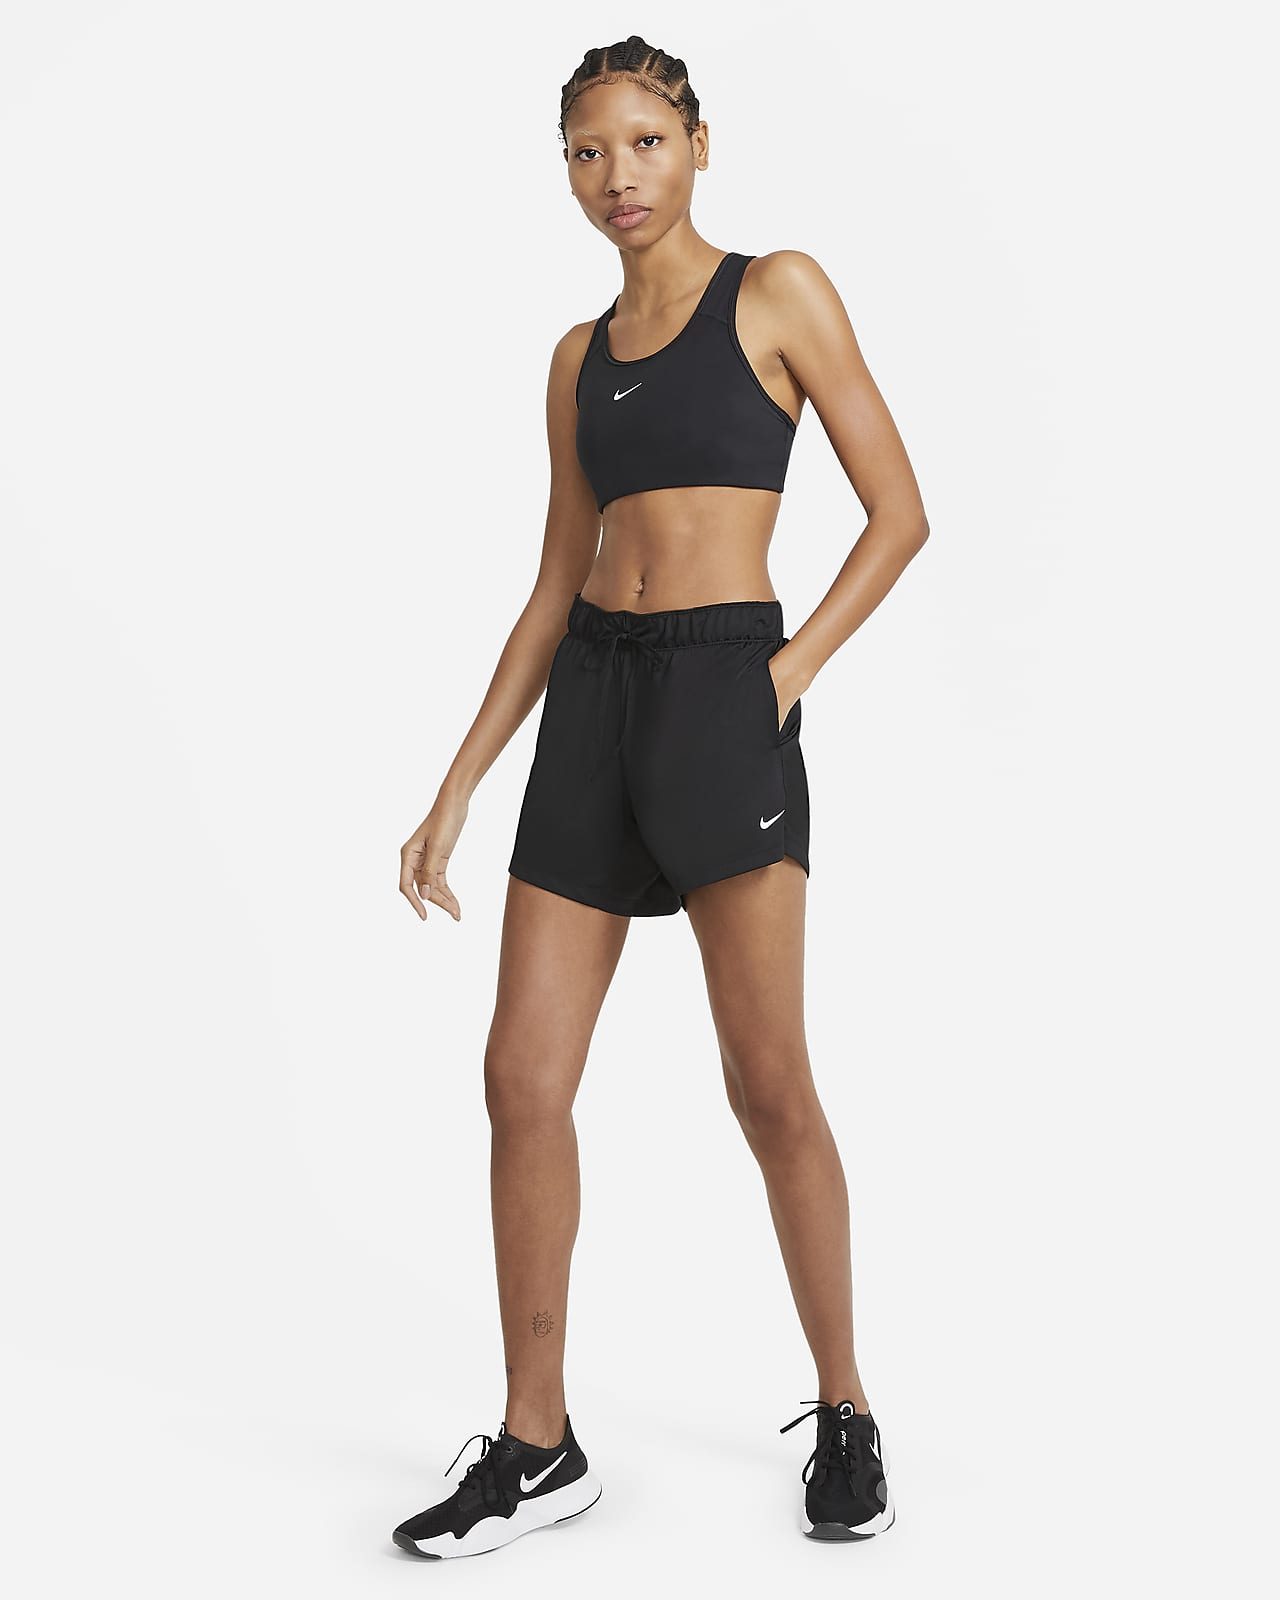 NIKE Short Pro BLK MUJER